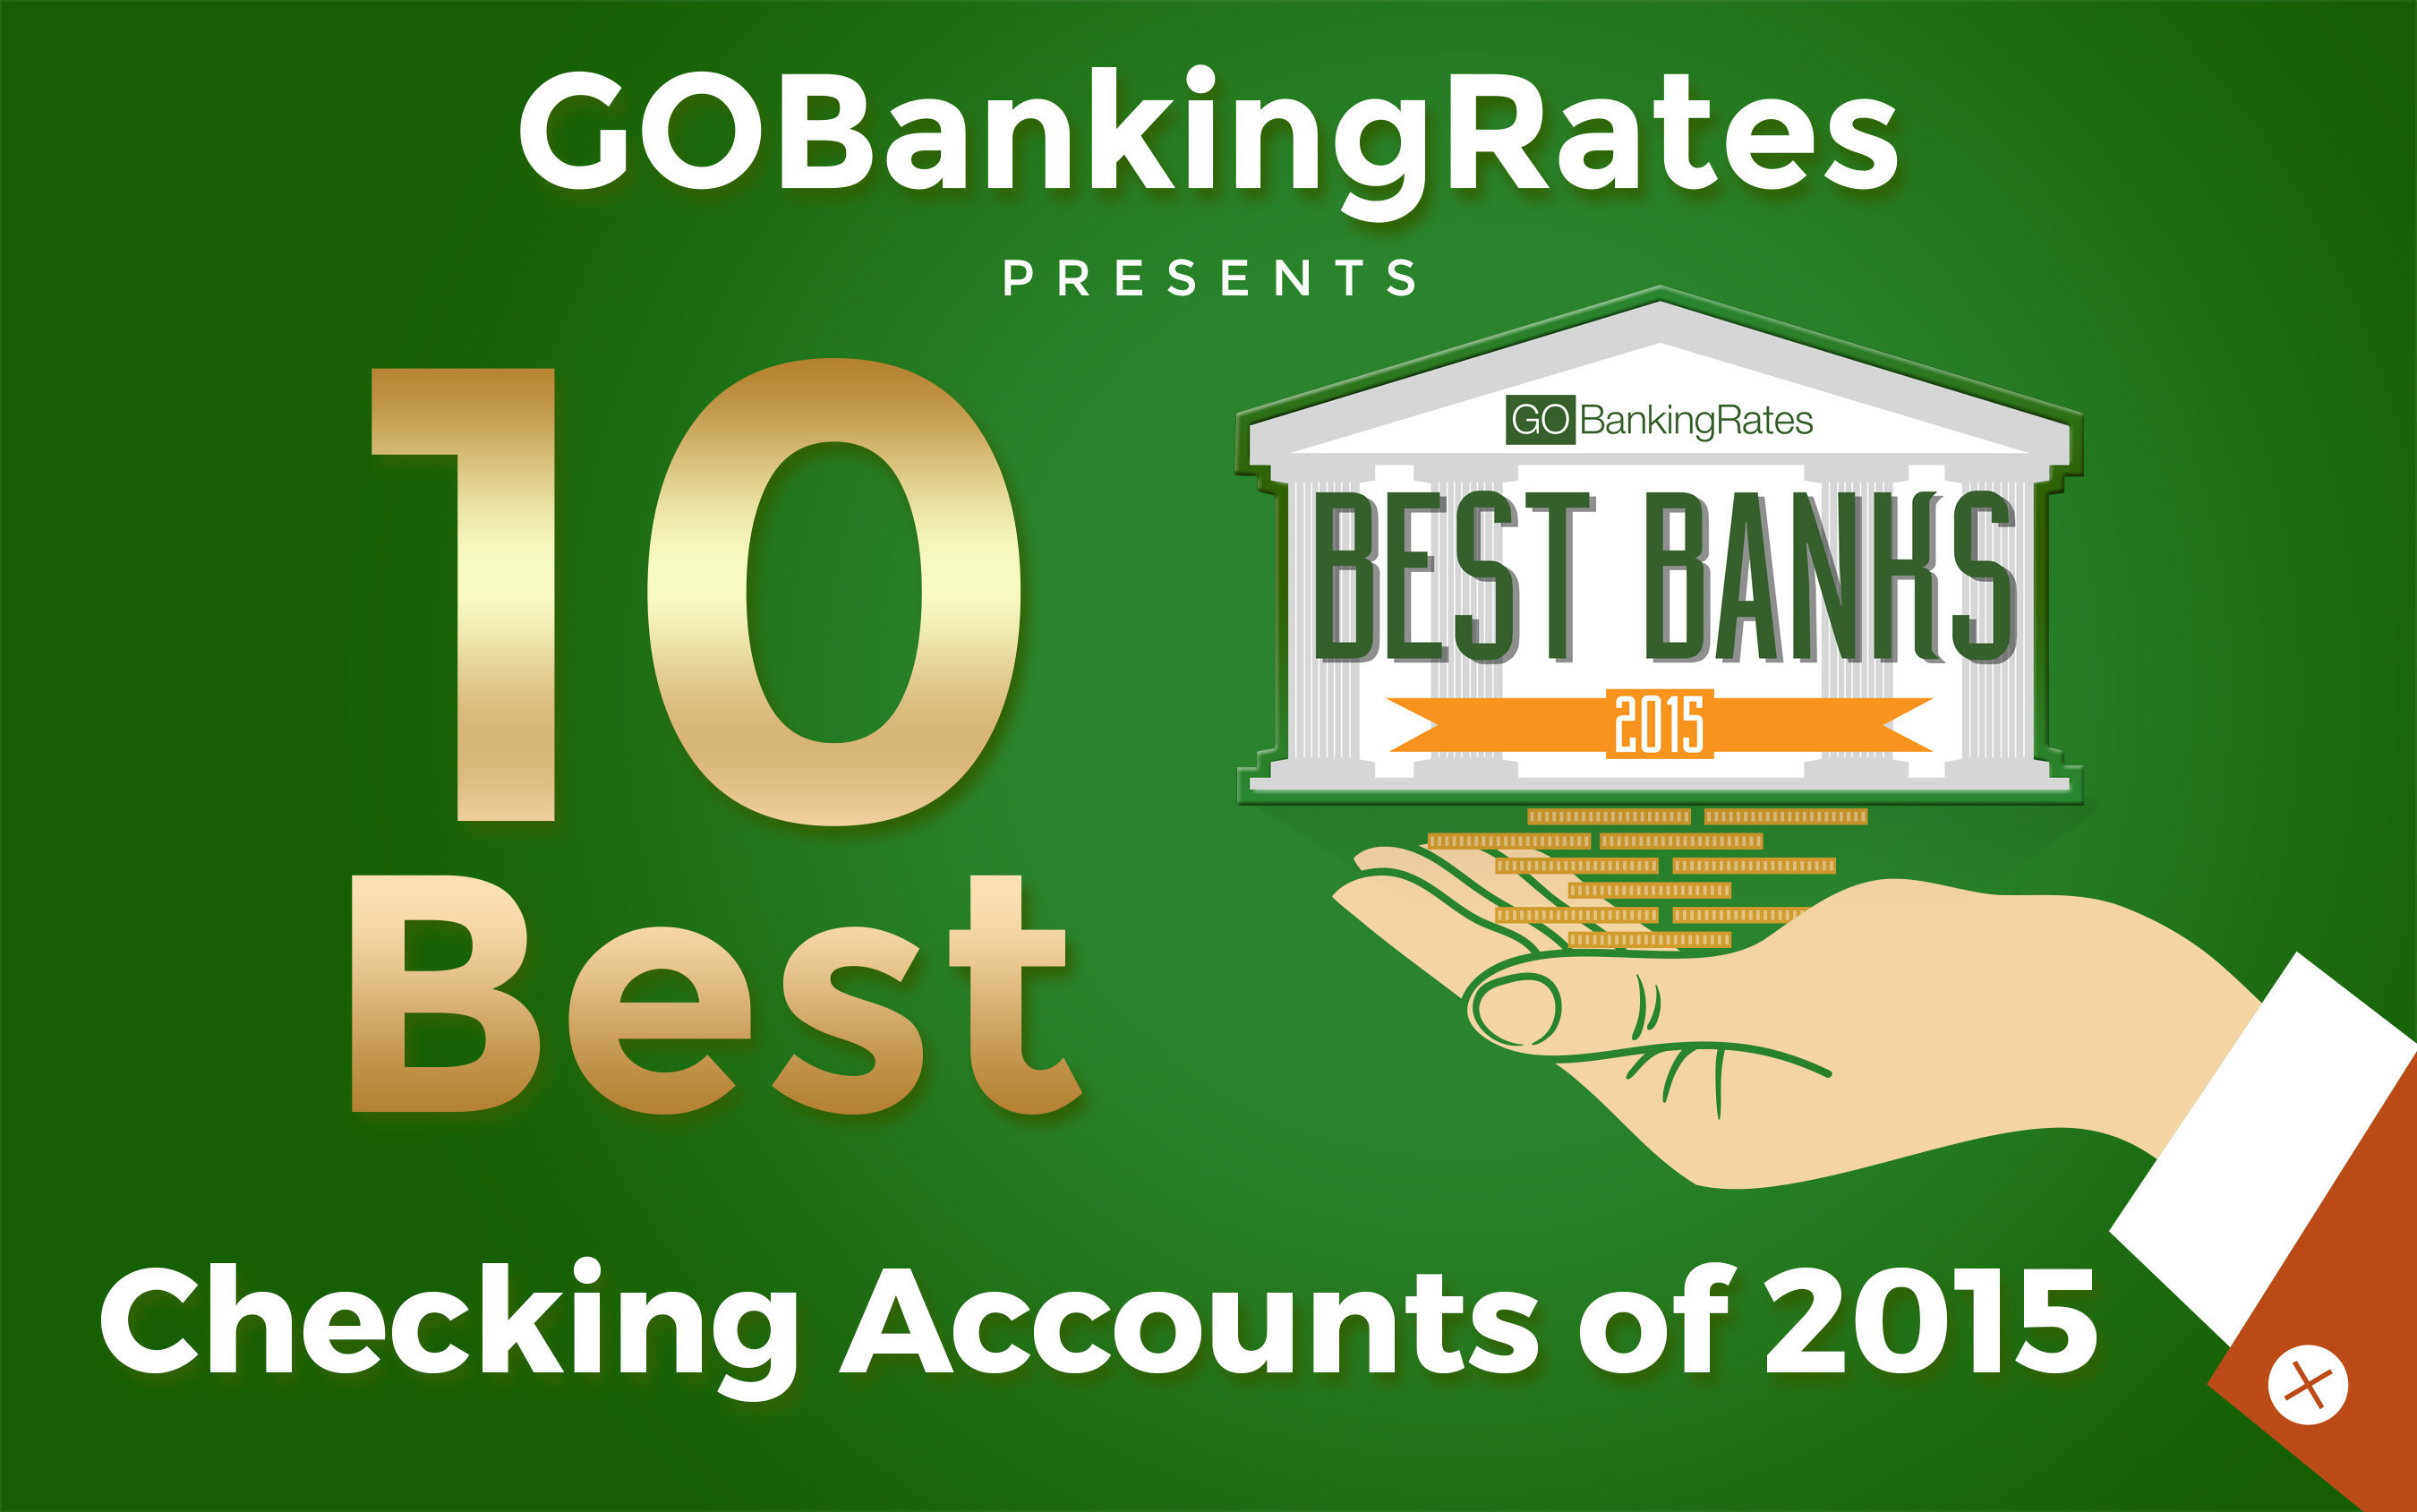 GOBankingRates' Study Uncovers 10 Best Checking Accounts for 2015